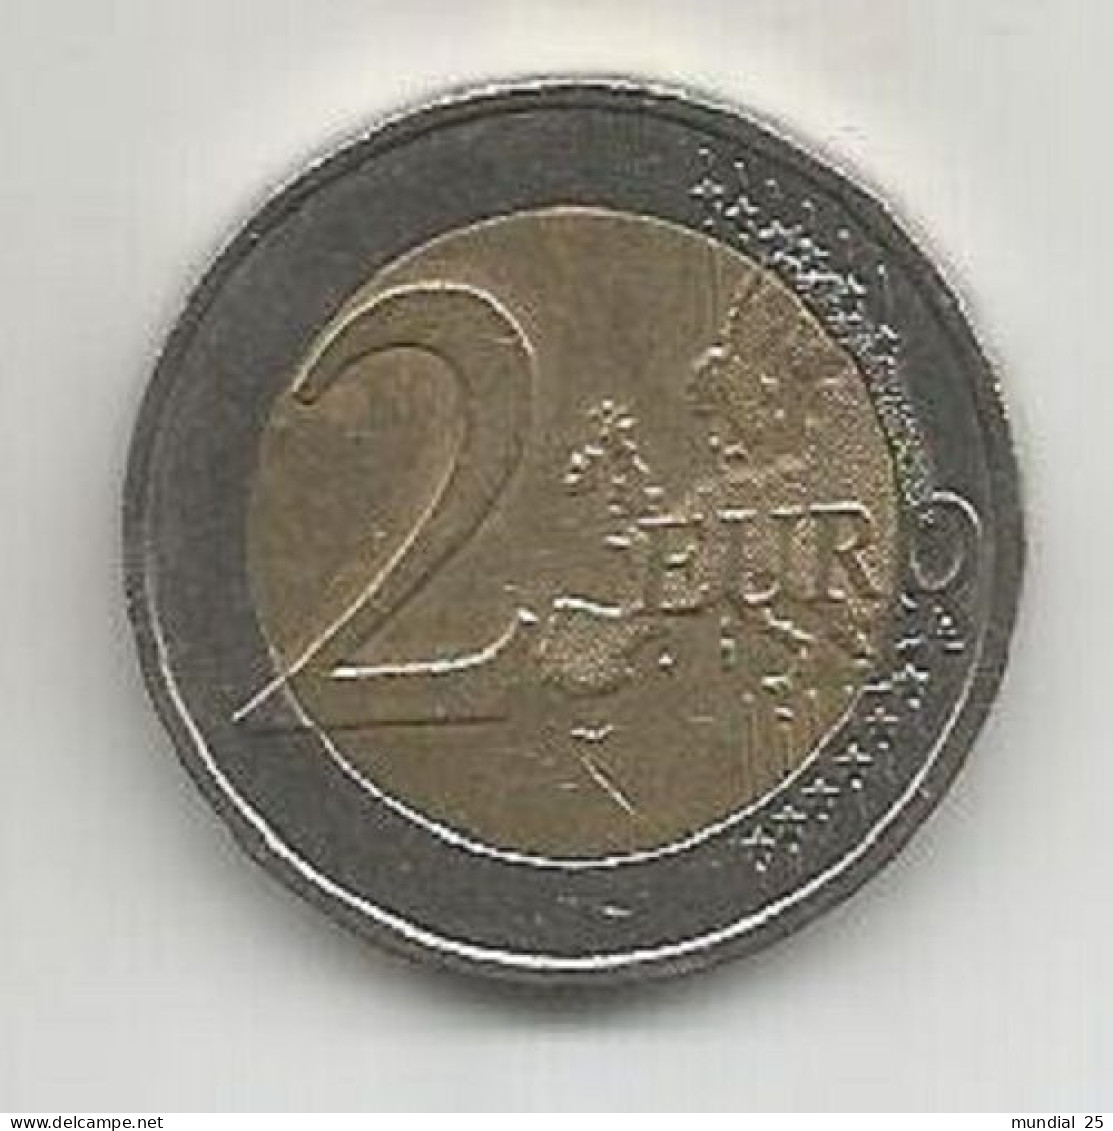 FRANCE 2 EURO 2012 - EURO COINAGE, 10th ANNIVERSARY - France